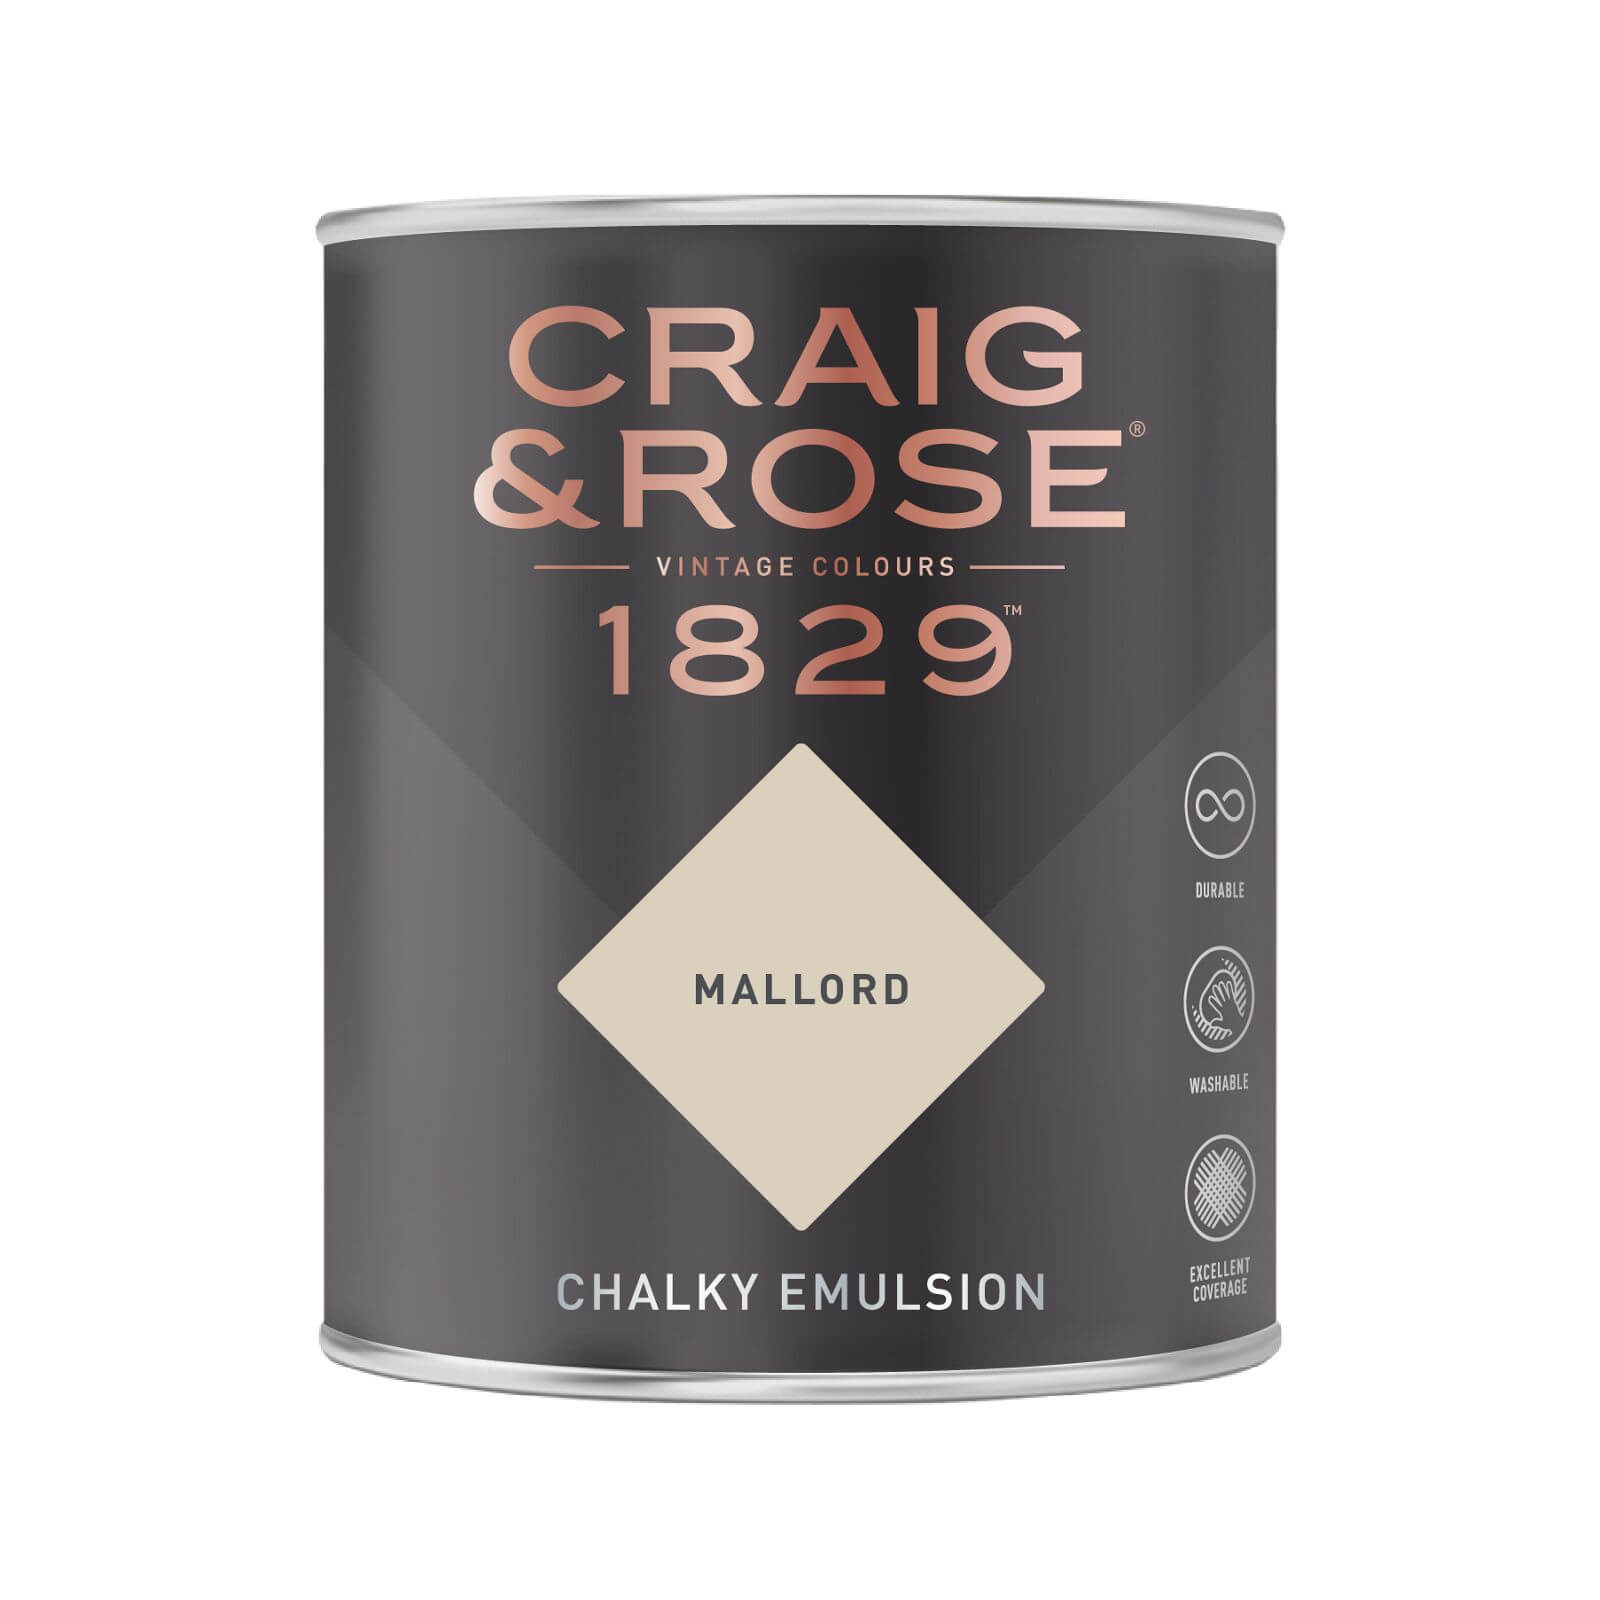 Craig & Rose 1829 Chalky Emulsion Paint Mallord - 750ml